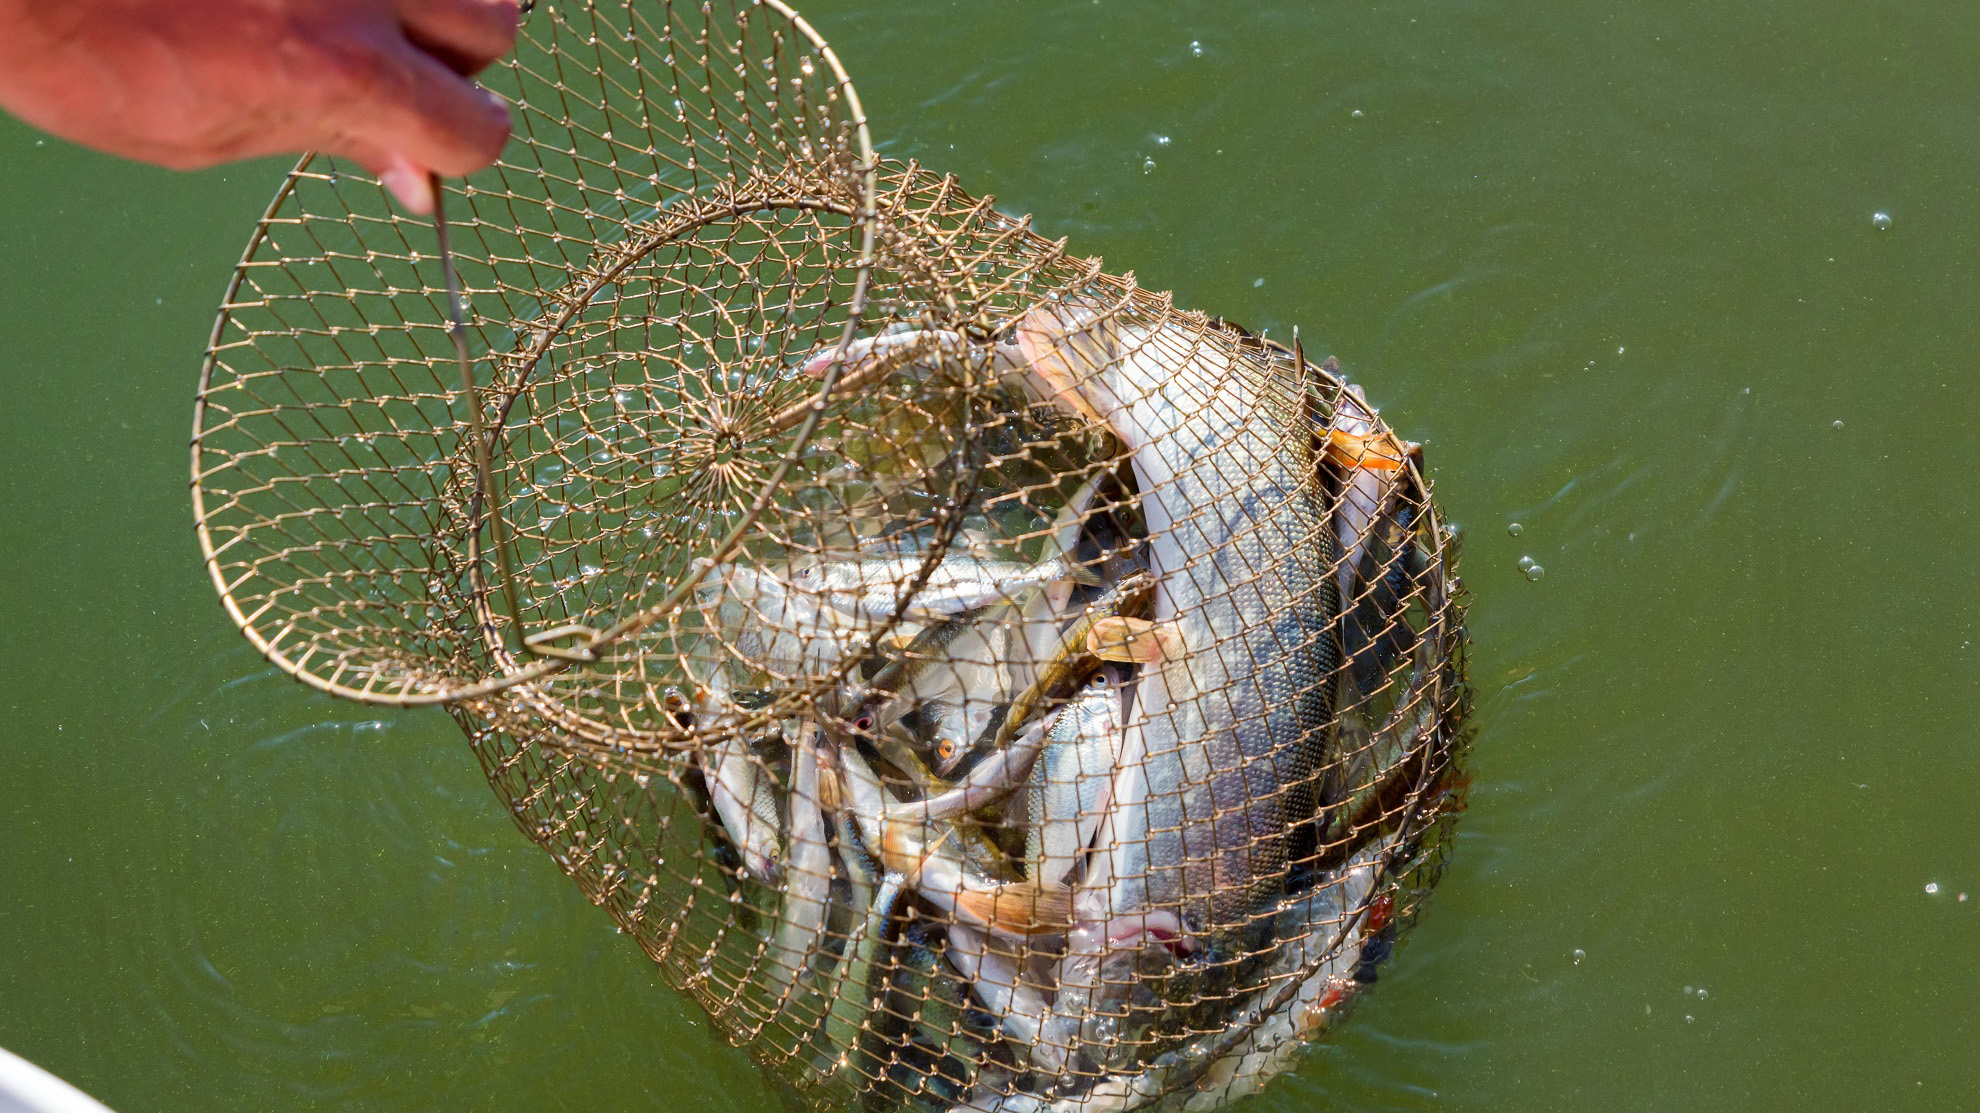 http://View%20of%20different%20freshwater%20fish%20caught%20in%20a%20net%20trap